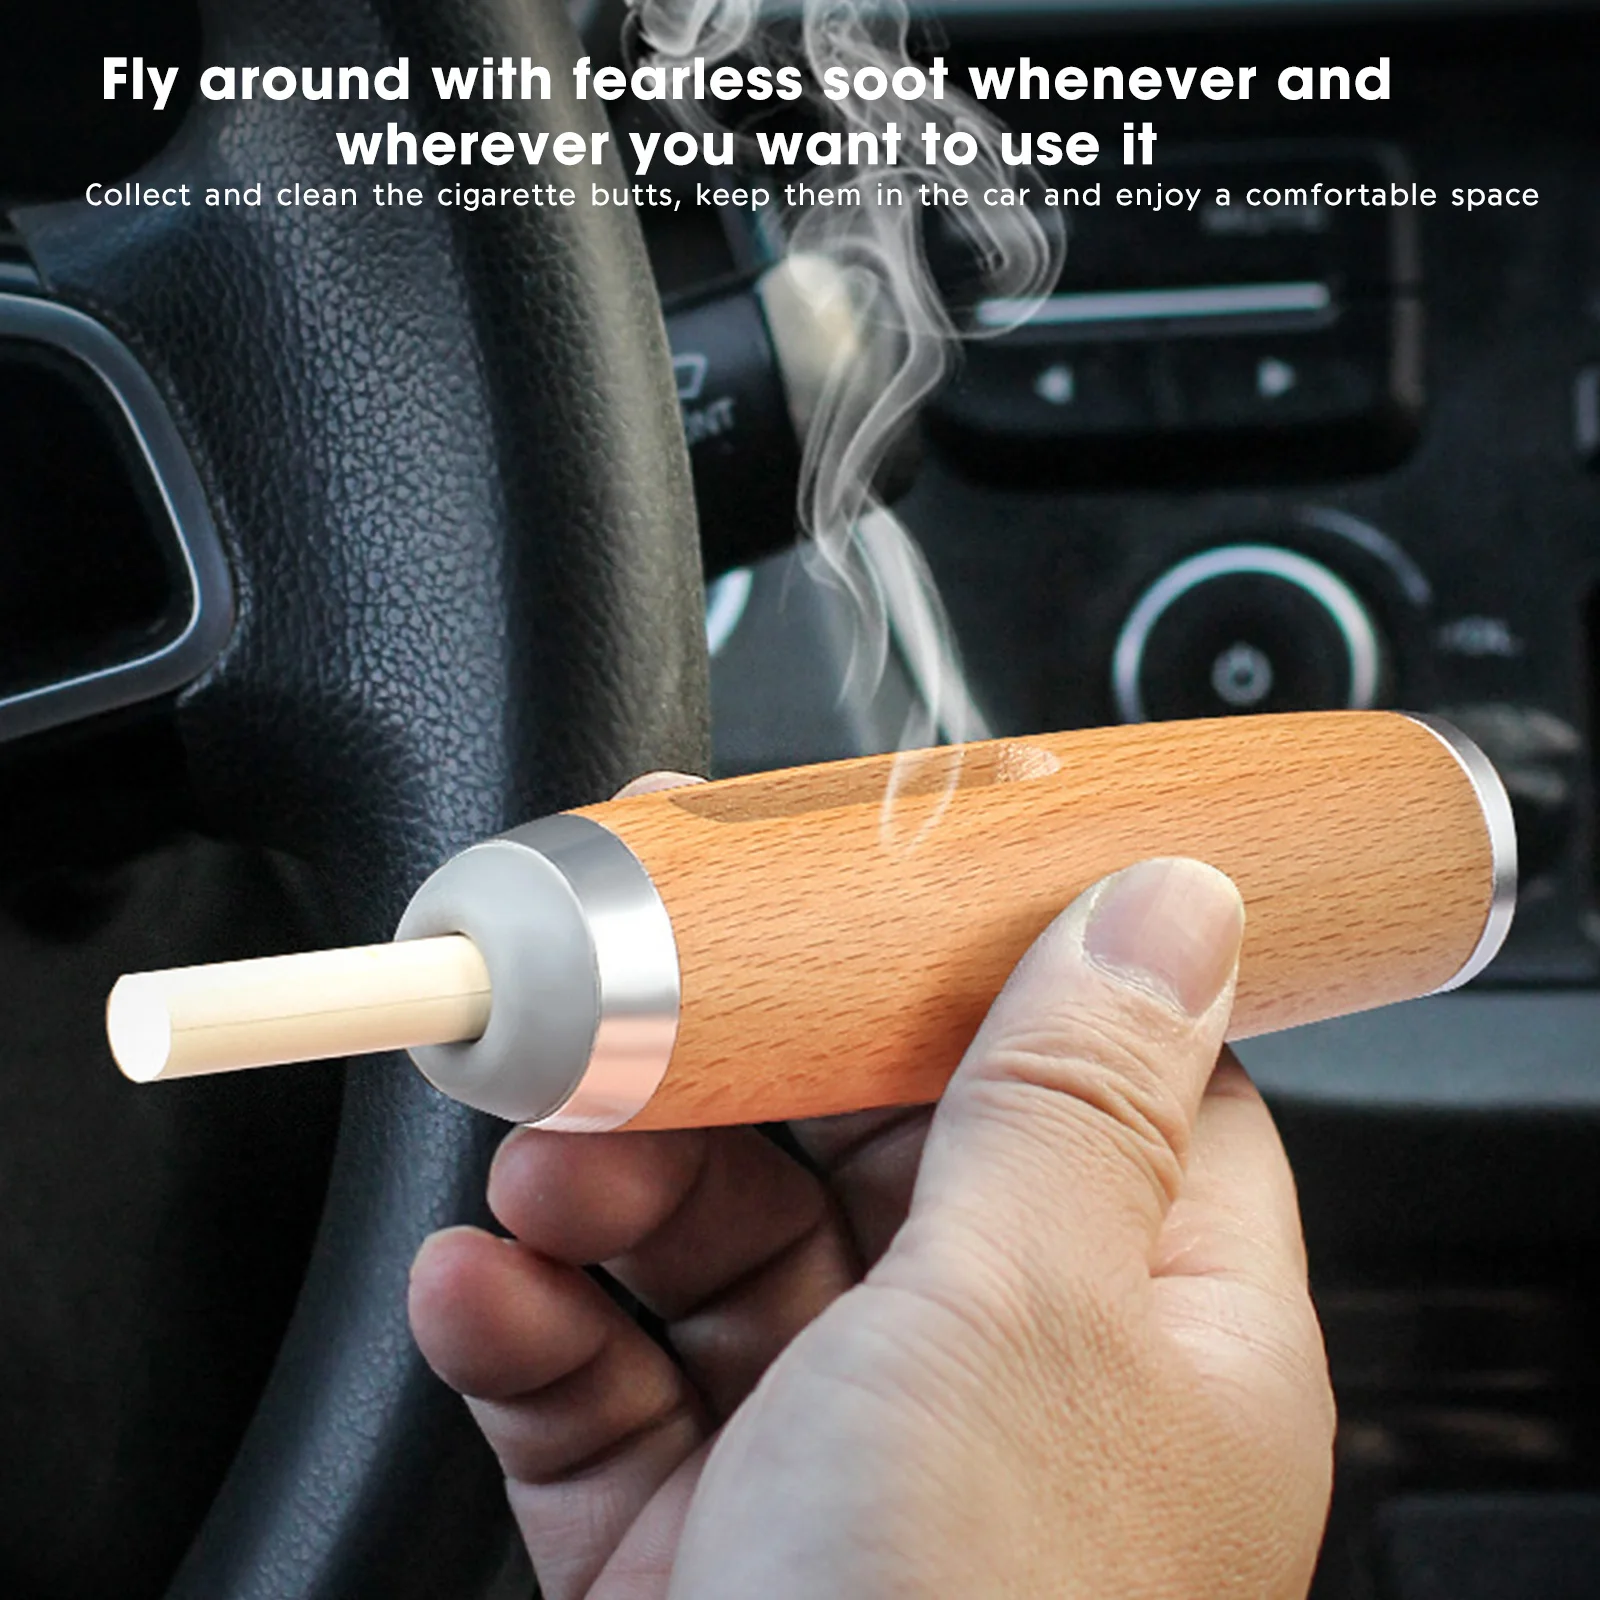 Car Ashtray Practical Portable Smokeless Ash Tray Smoke Holder Exquisite  Durable Self-adhesive Cigarette Holder Ashtray - Price history & Review, AliExpress Seller - Yammy Store